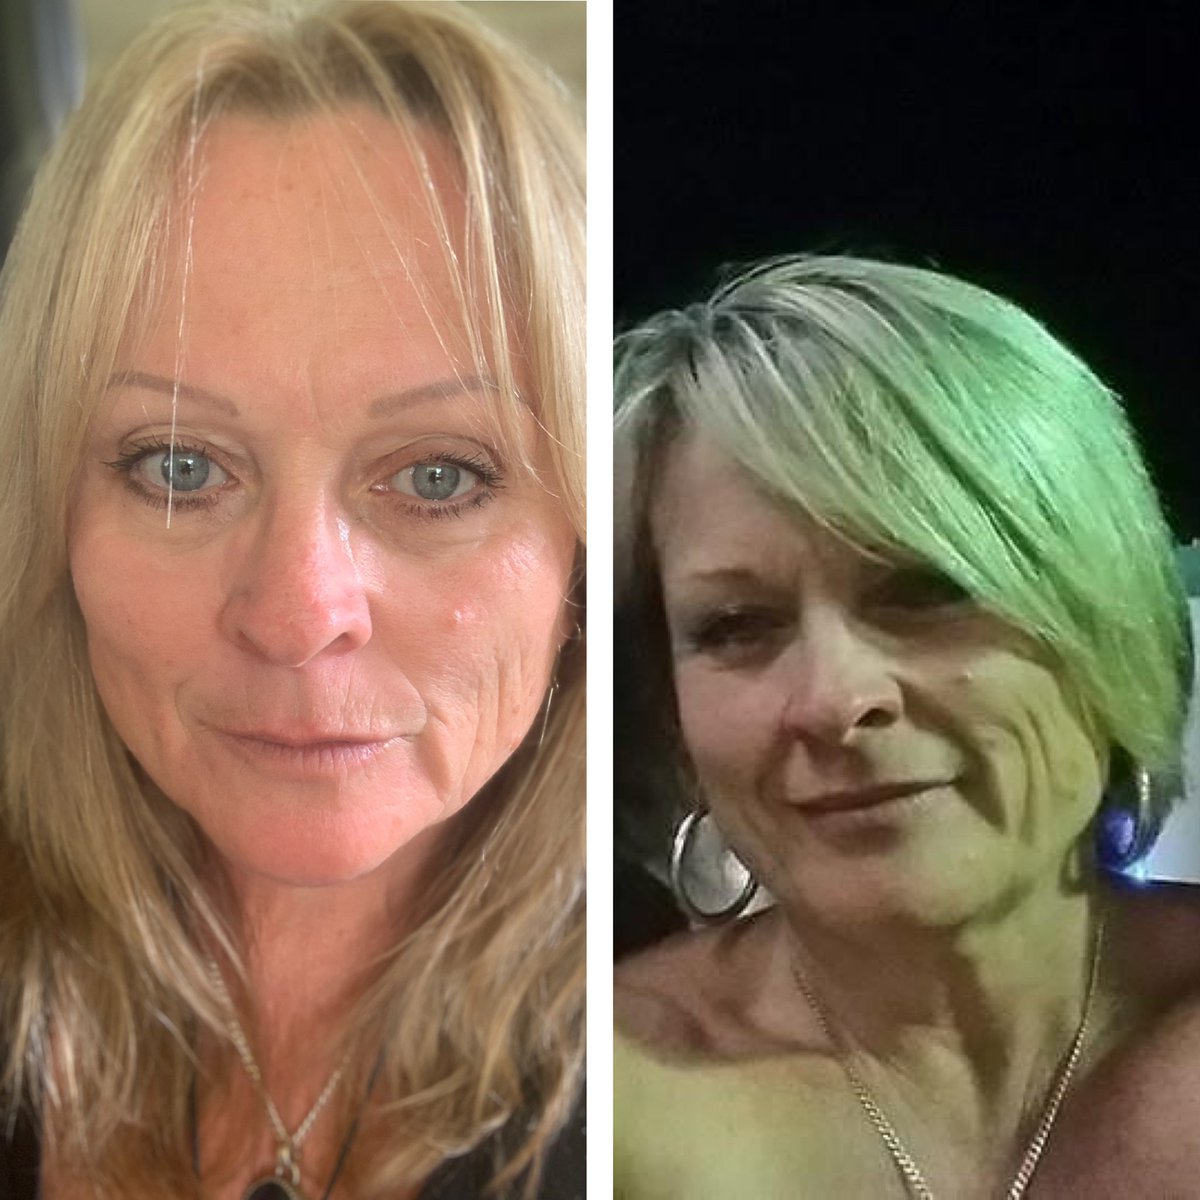 #10yearchallenge 
Age 60 on the left and age 50 on the right. 
It seems the shape of my face has changed on carnivore.